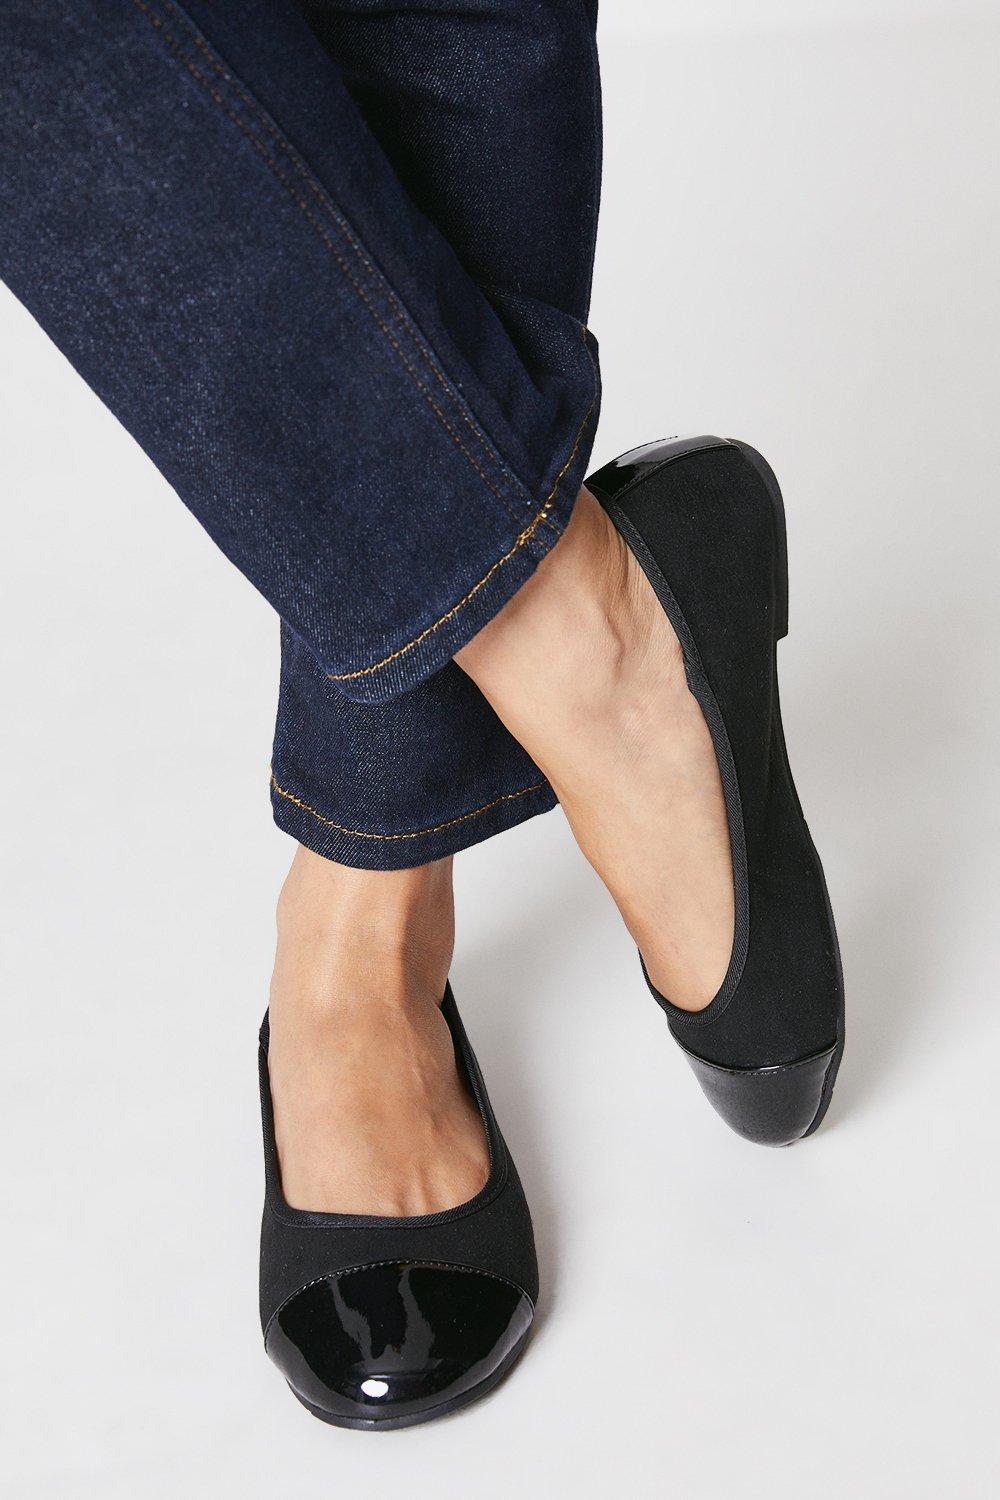 Womens Good For The Sole: Wide Fit Tilly Ballet Pumps